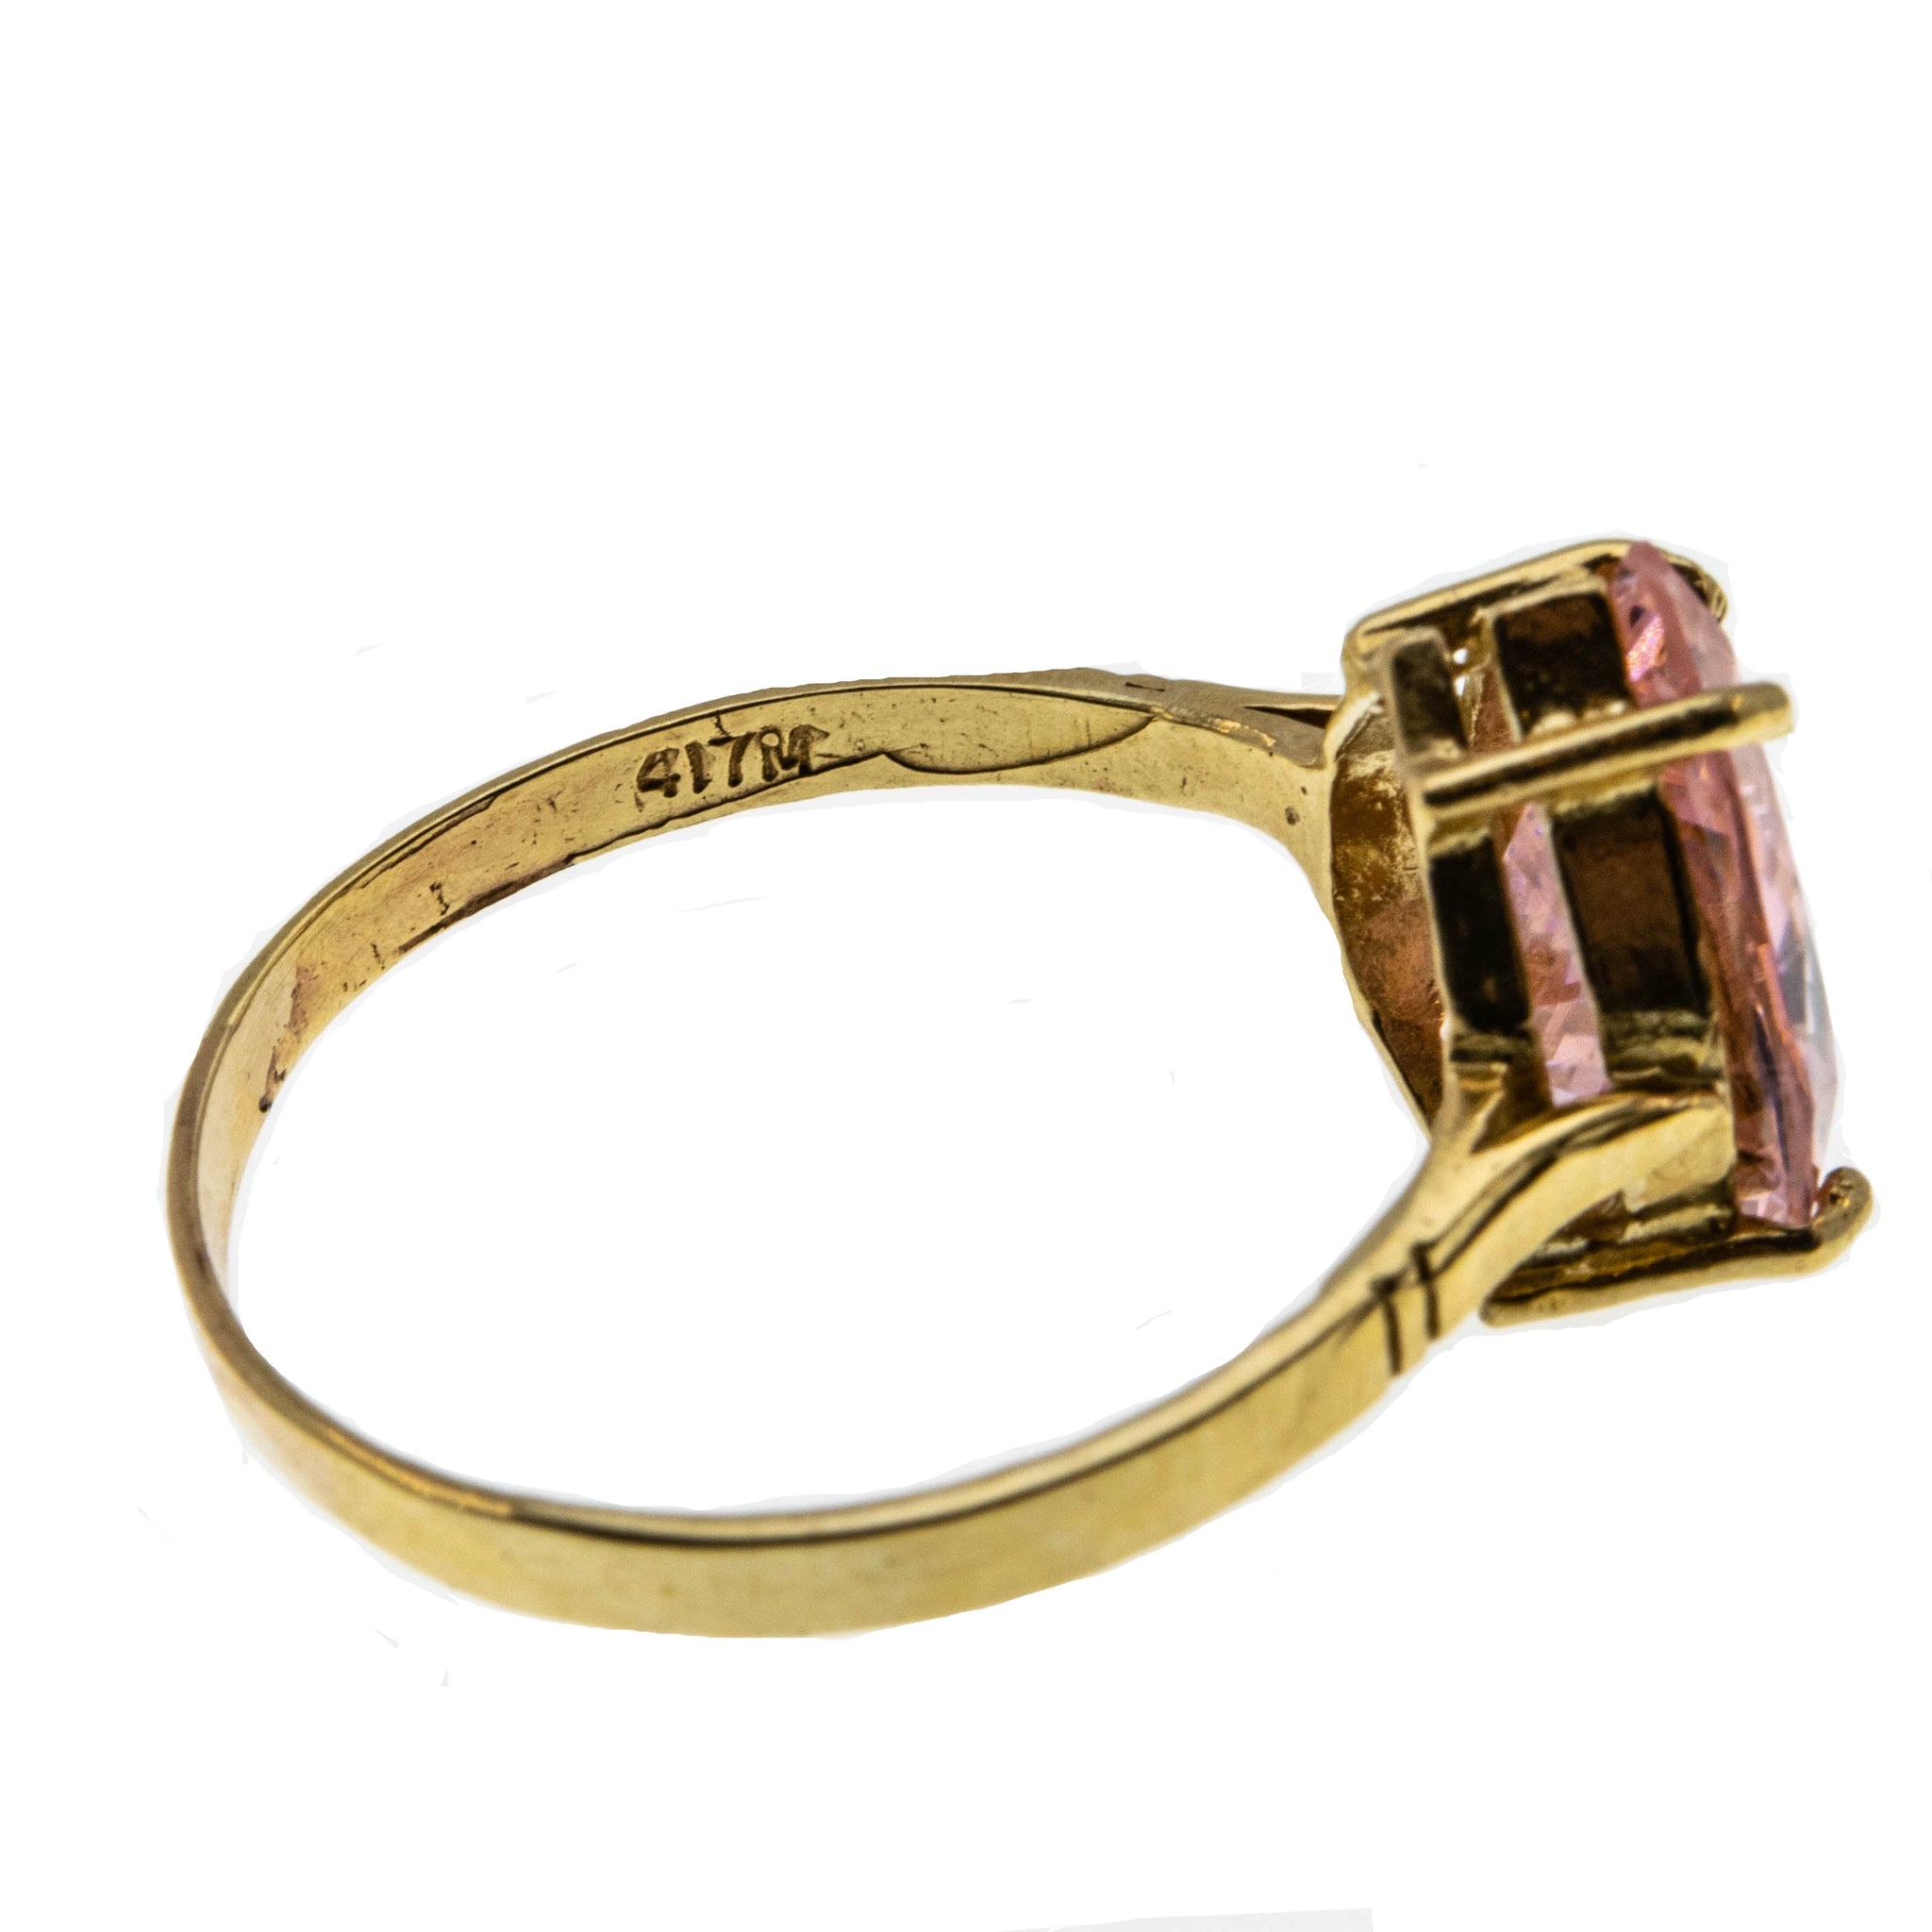 Pink Ice - Vintage 10K Gold Pink CZ Pear Shaped Solitaire Ring 